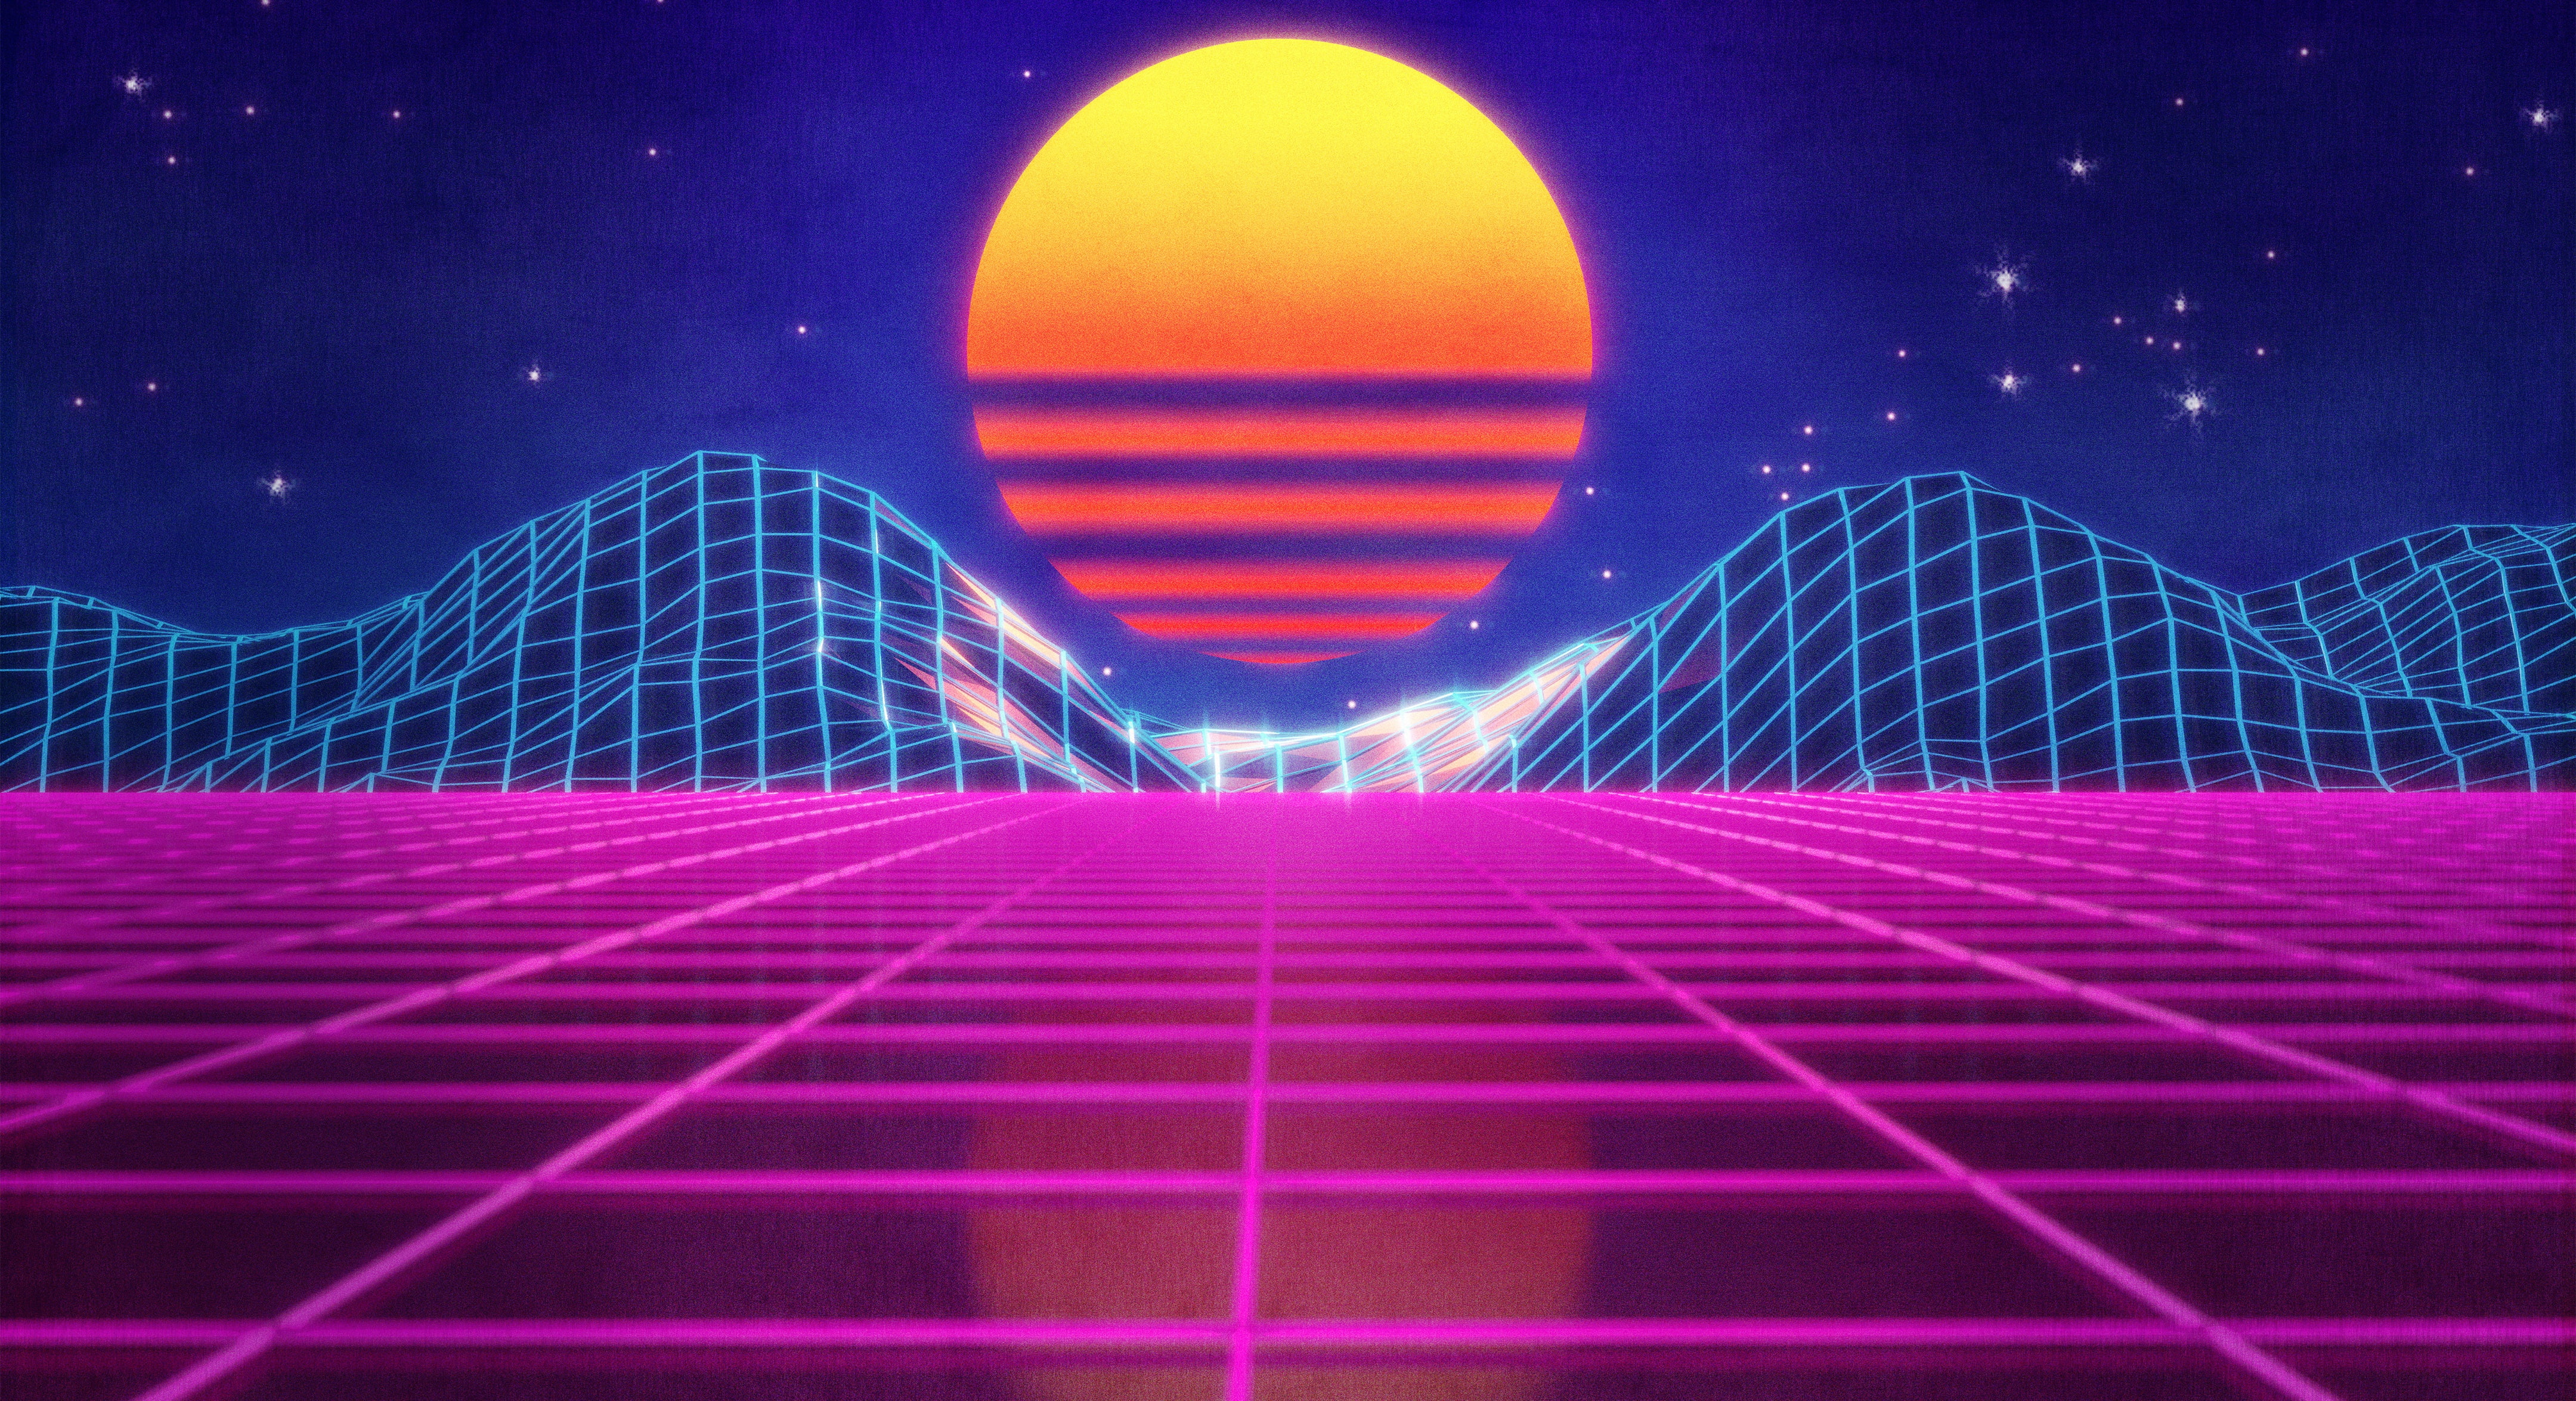 The sun, Mountains, Music, Stars, Neon, Electronic, Synthpop